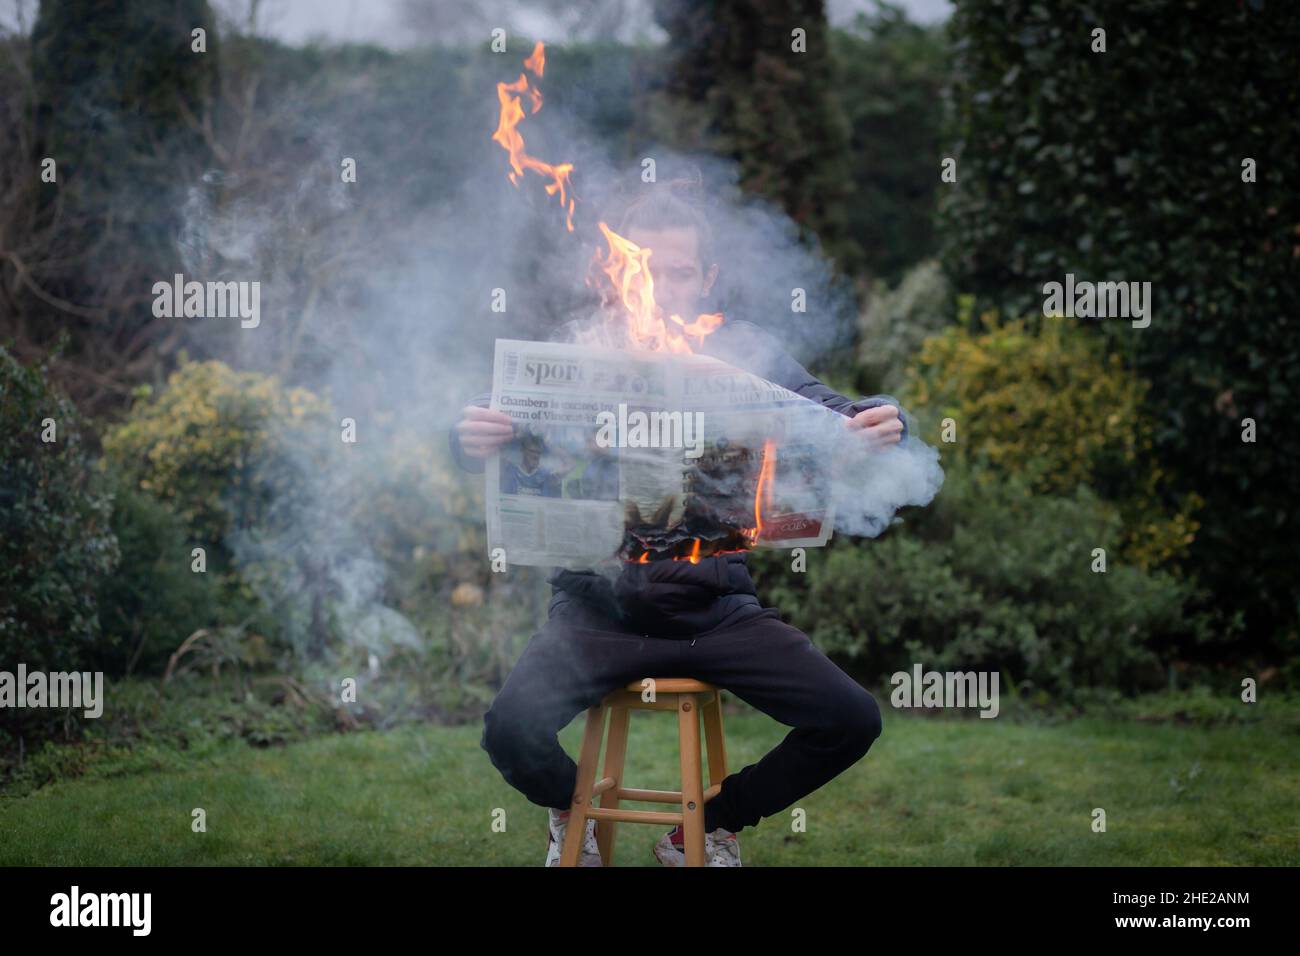 Woodbridge, Suffolk, UK January 01 2021: A portrait of a young man reading a burning newspaper while sitting outside. Hot news, breaking news concept Stock Photo